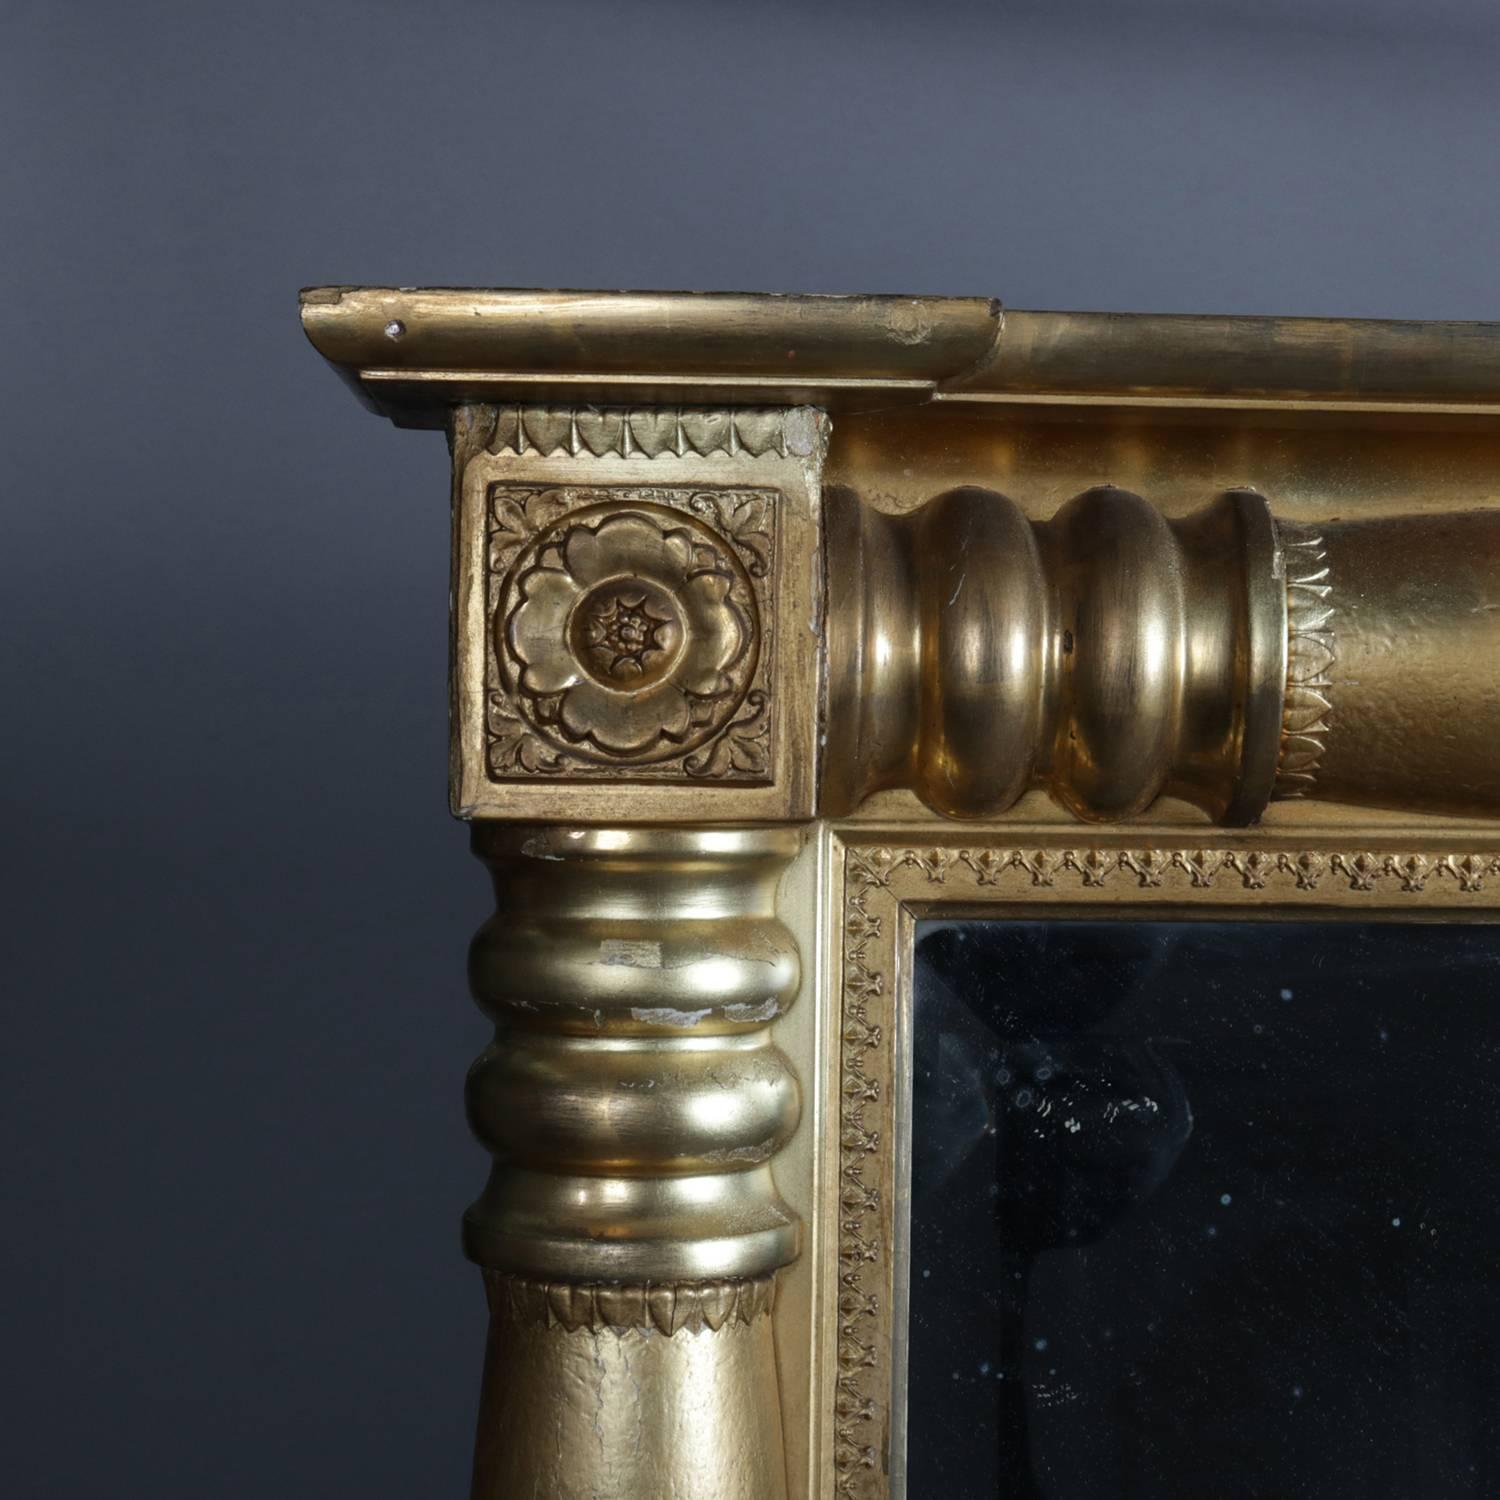 Antique American Empire triptych over mantel mirror feature gold gilt frame with columns and carved floral die joints, 19th century

***DELIVERY NOTICE – Due to COVID-19 we are employing NO-CONTACT PRACTICES in the transfer of purchased items. 